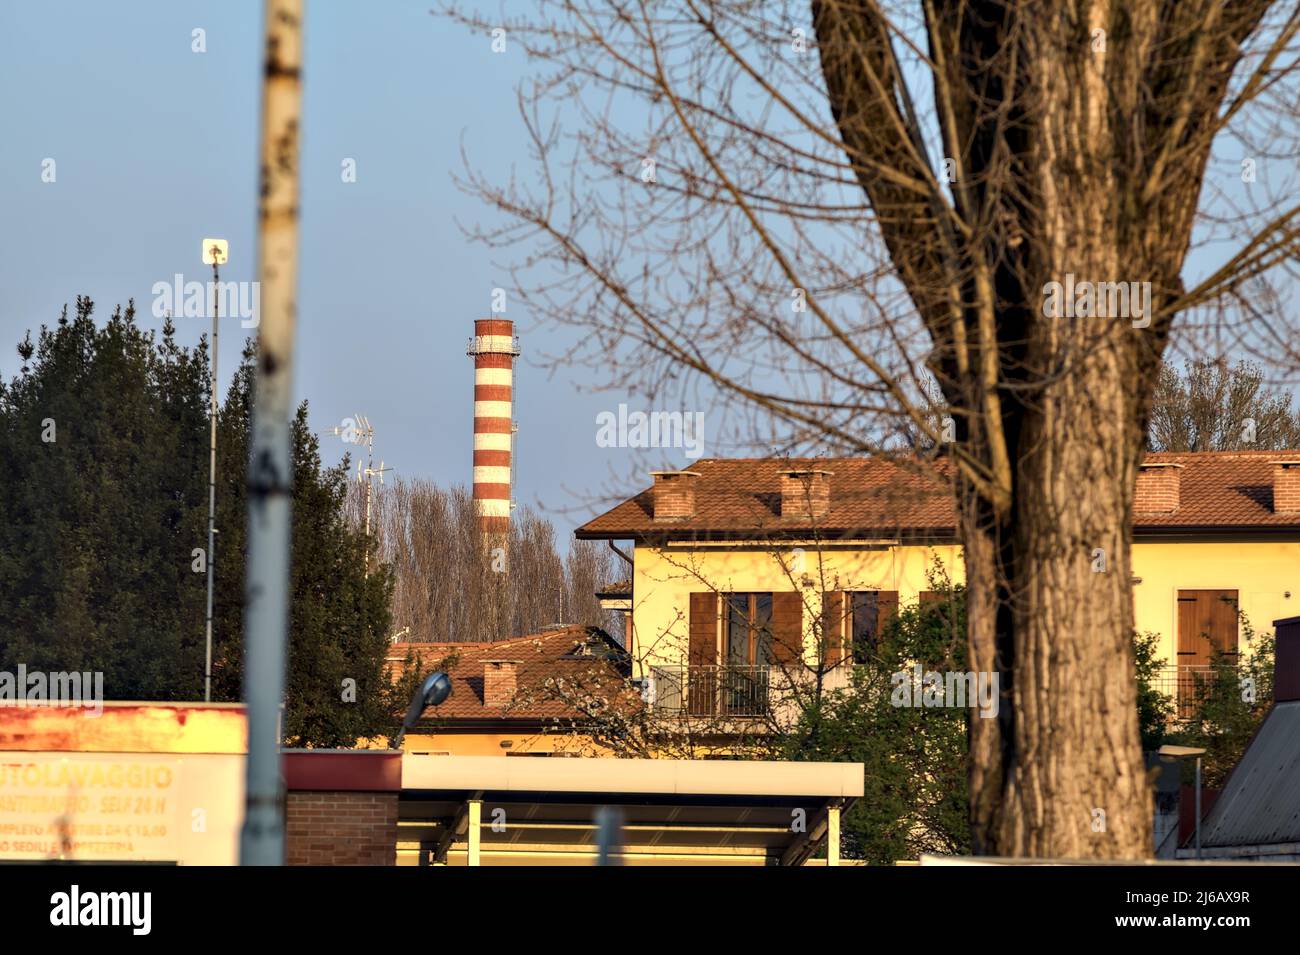 Residential area with a smokestack in the background at sunset Stock Photo